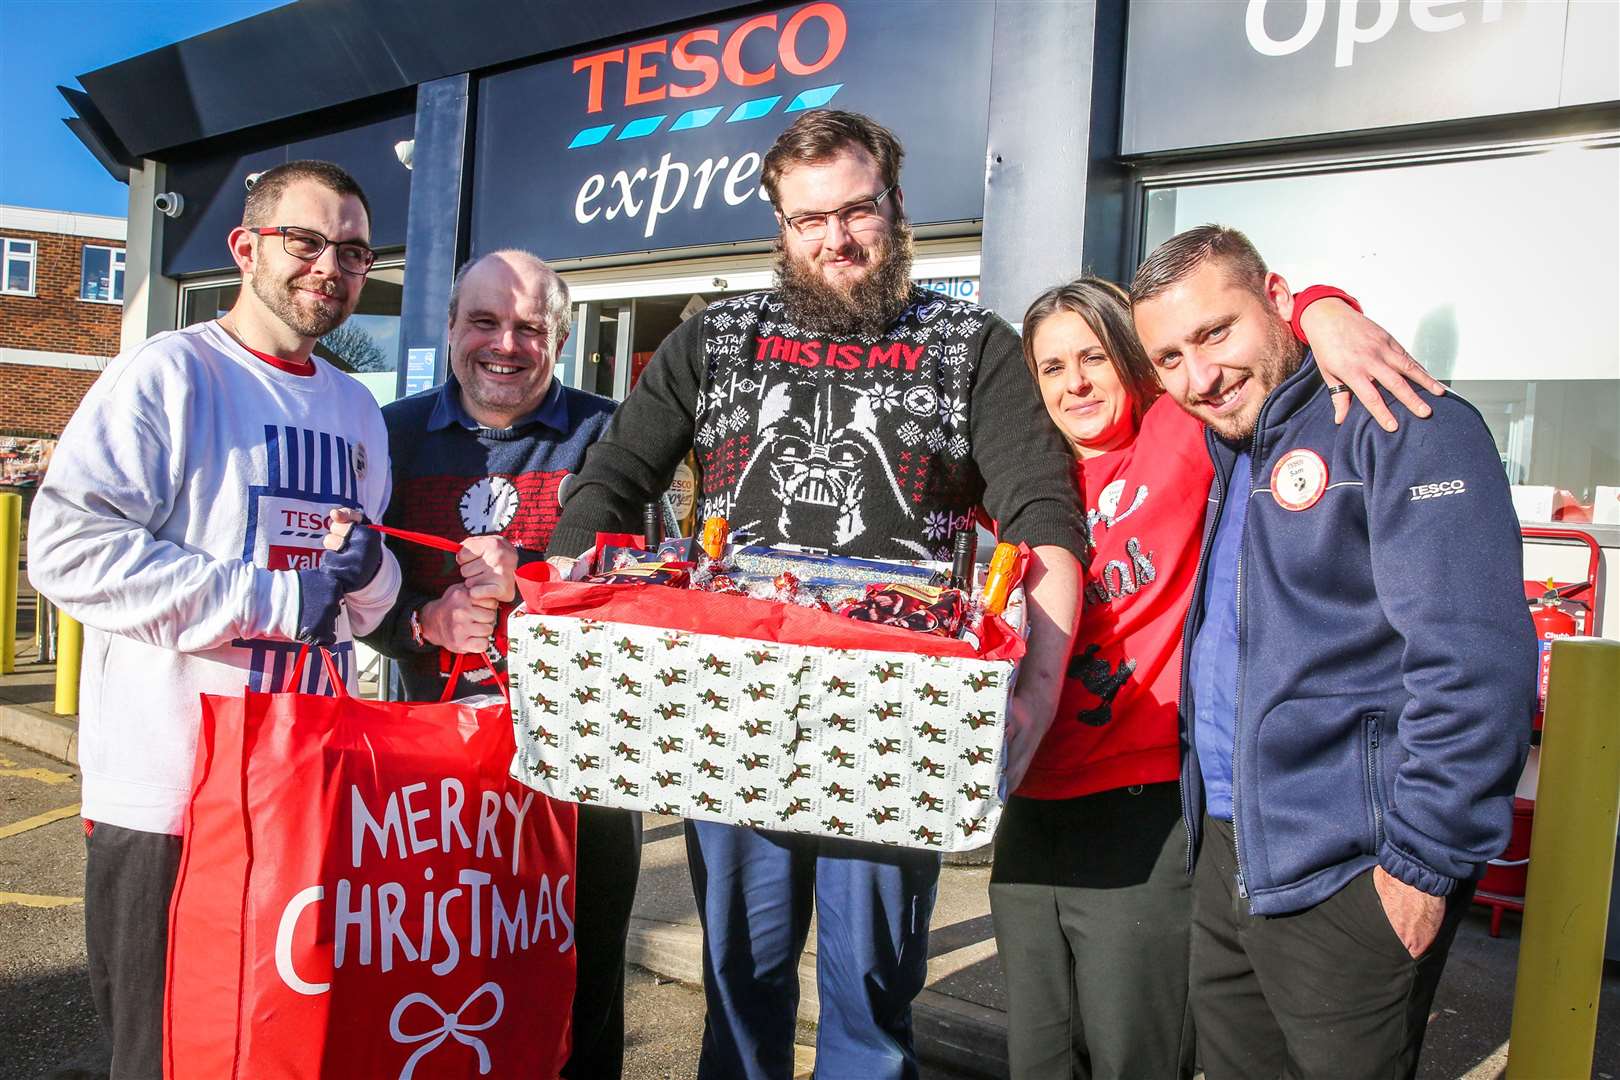 Tesco Express Bearsted staff John Everhurst, Tim Hatcher, Chris Oliver, Stephanie Clarkson and Sam Traynor with gifts for Demelza House. Picture: Matthew Walker. (24987936)